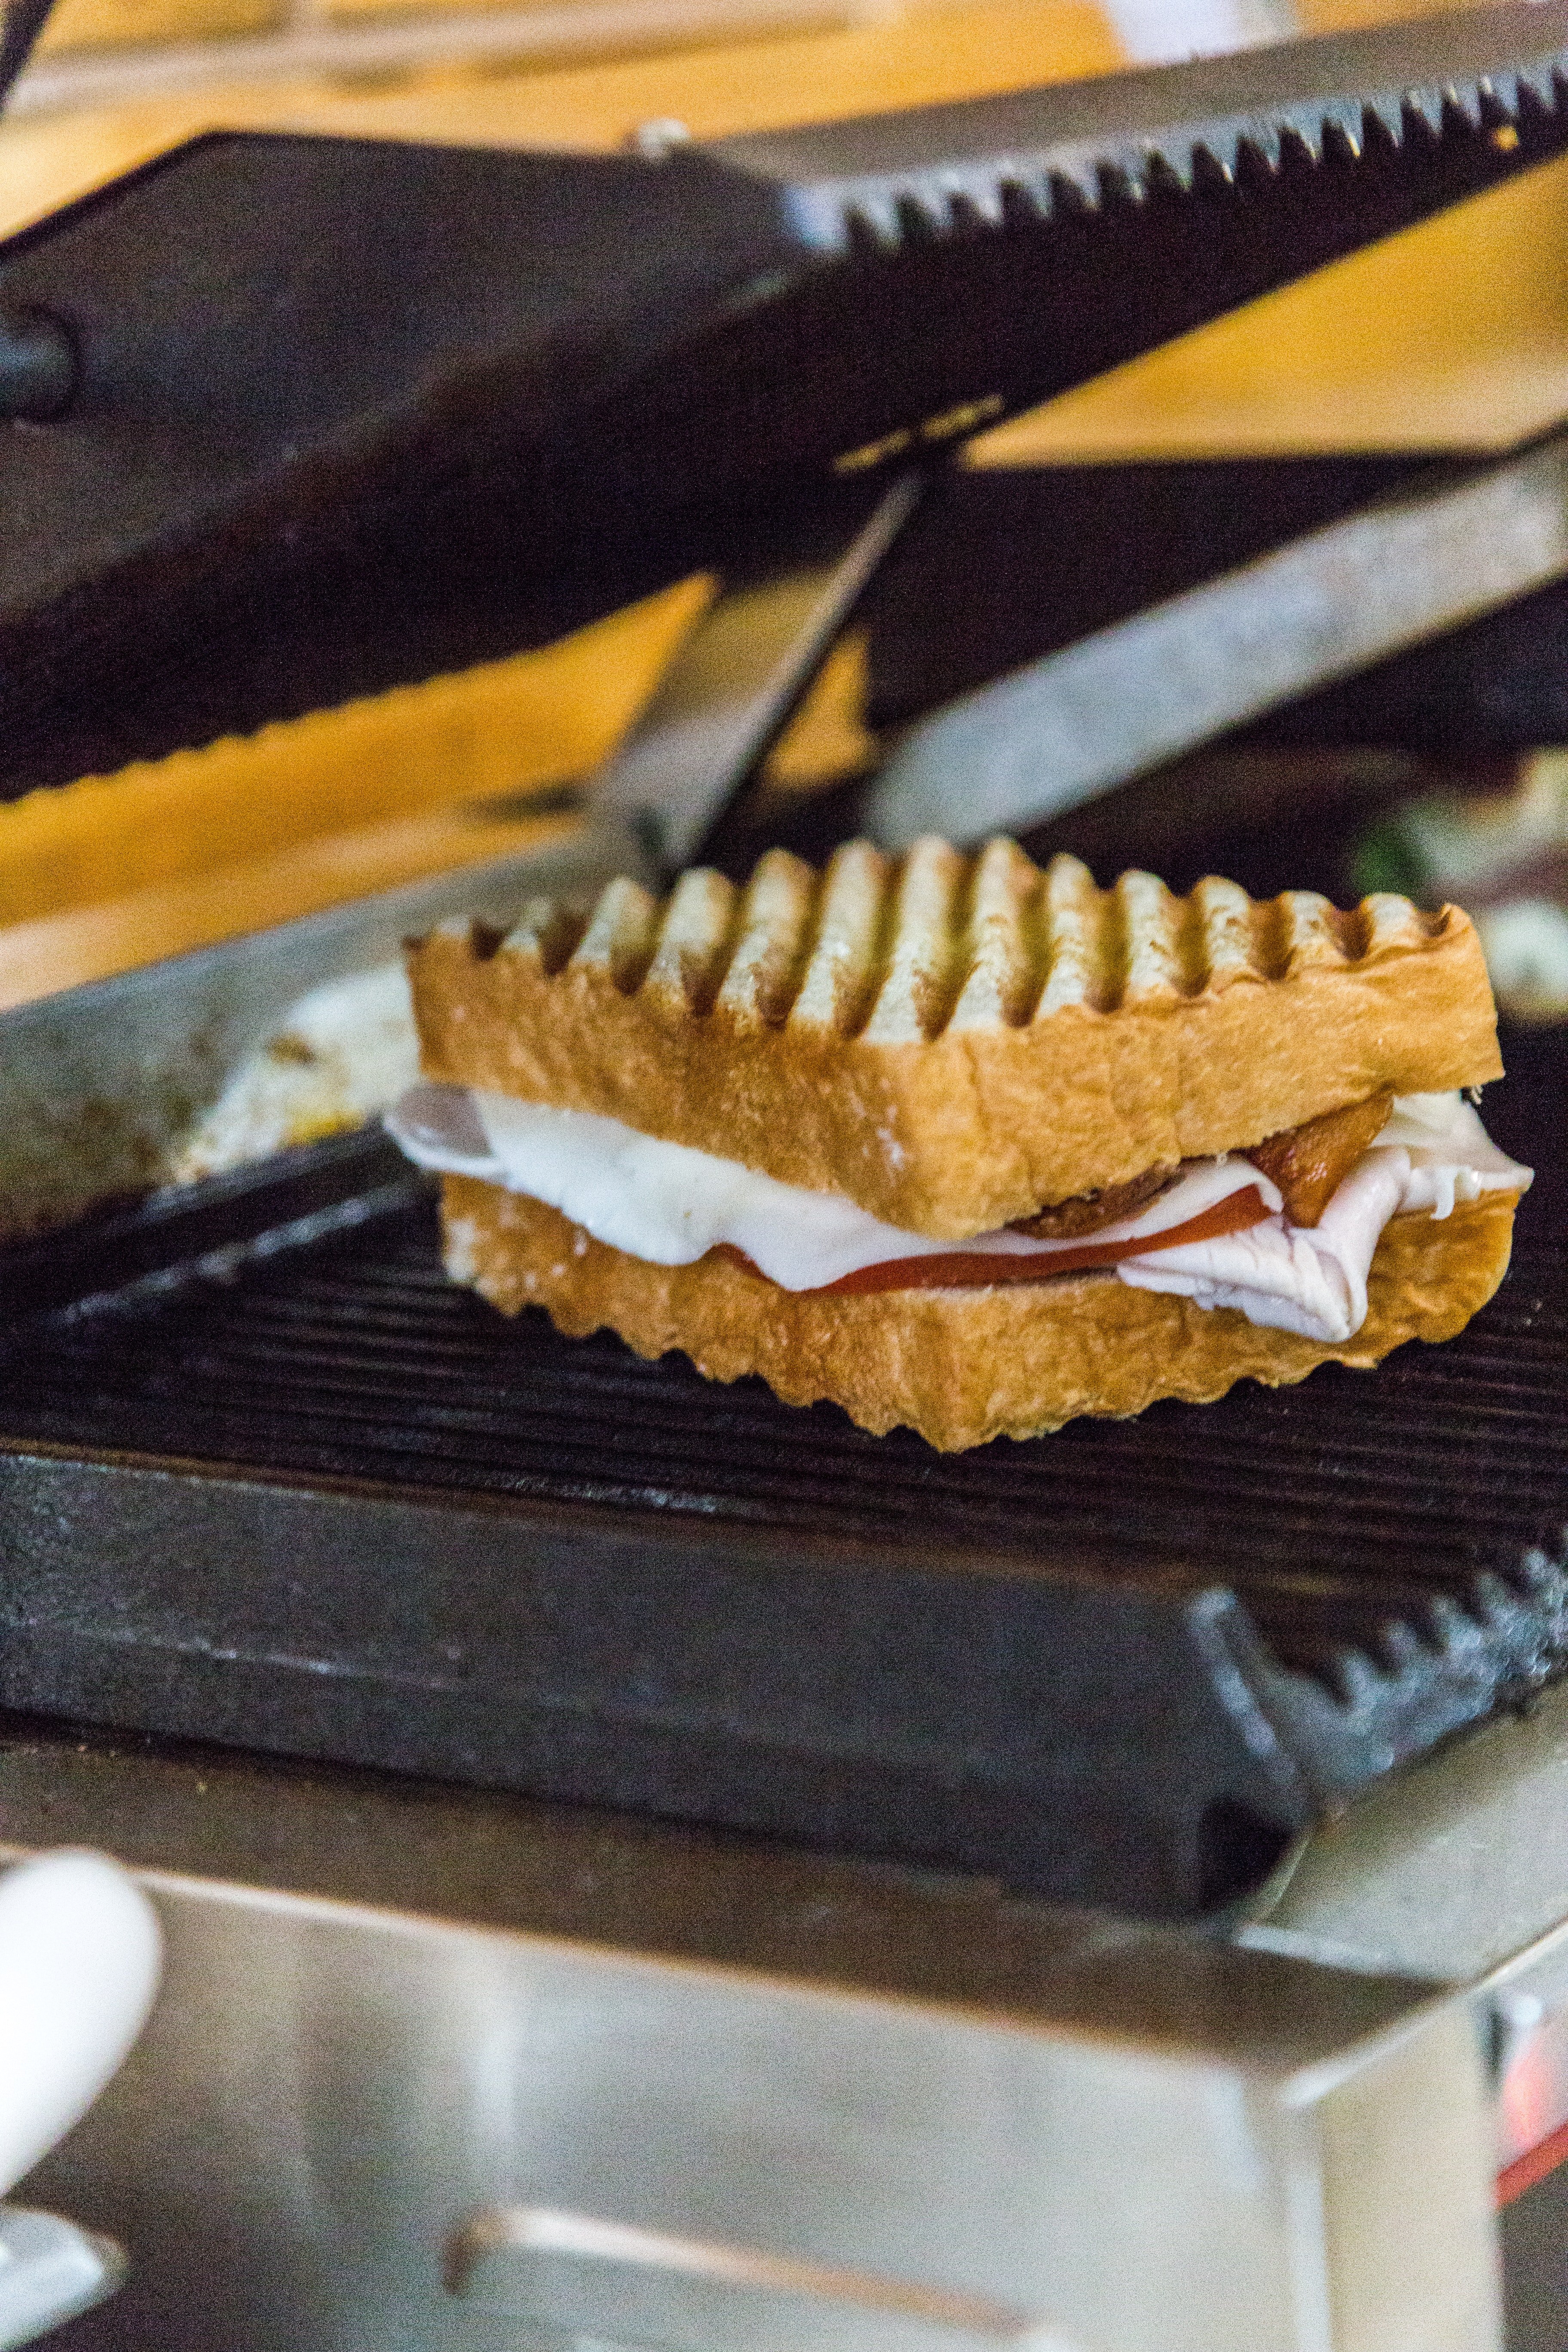 A sandwich on the grill | Photo: Pexels